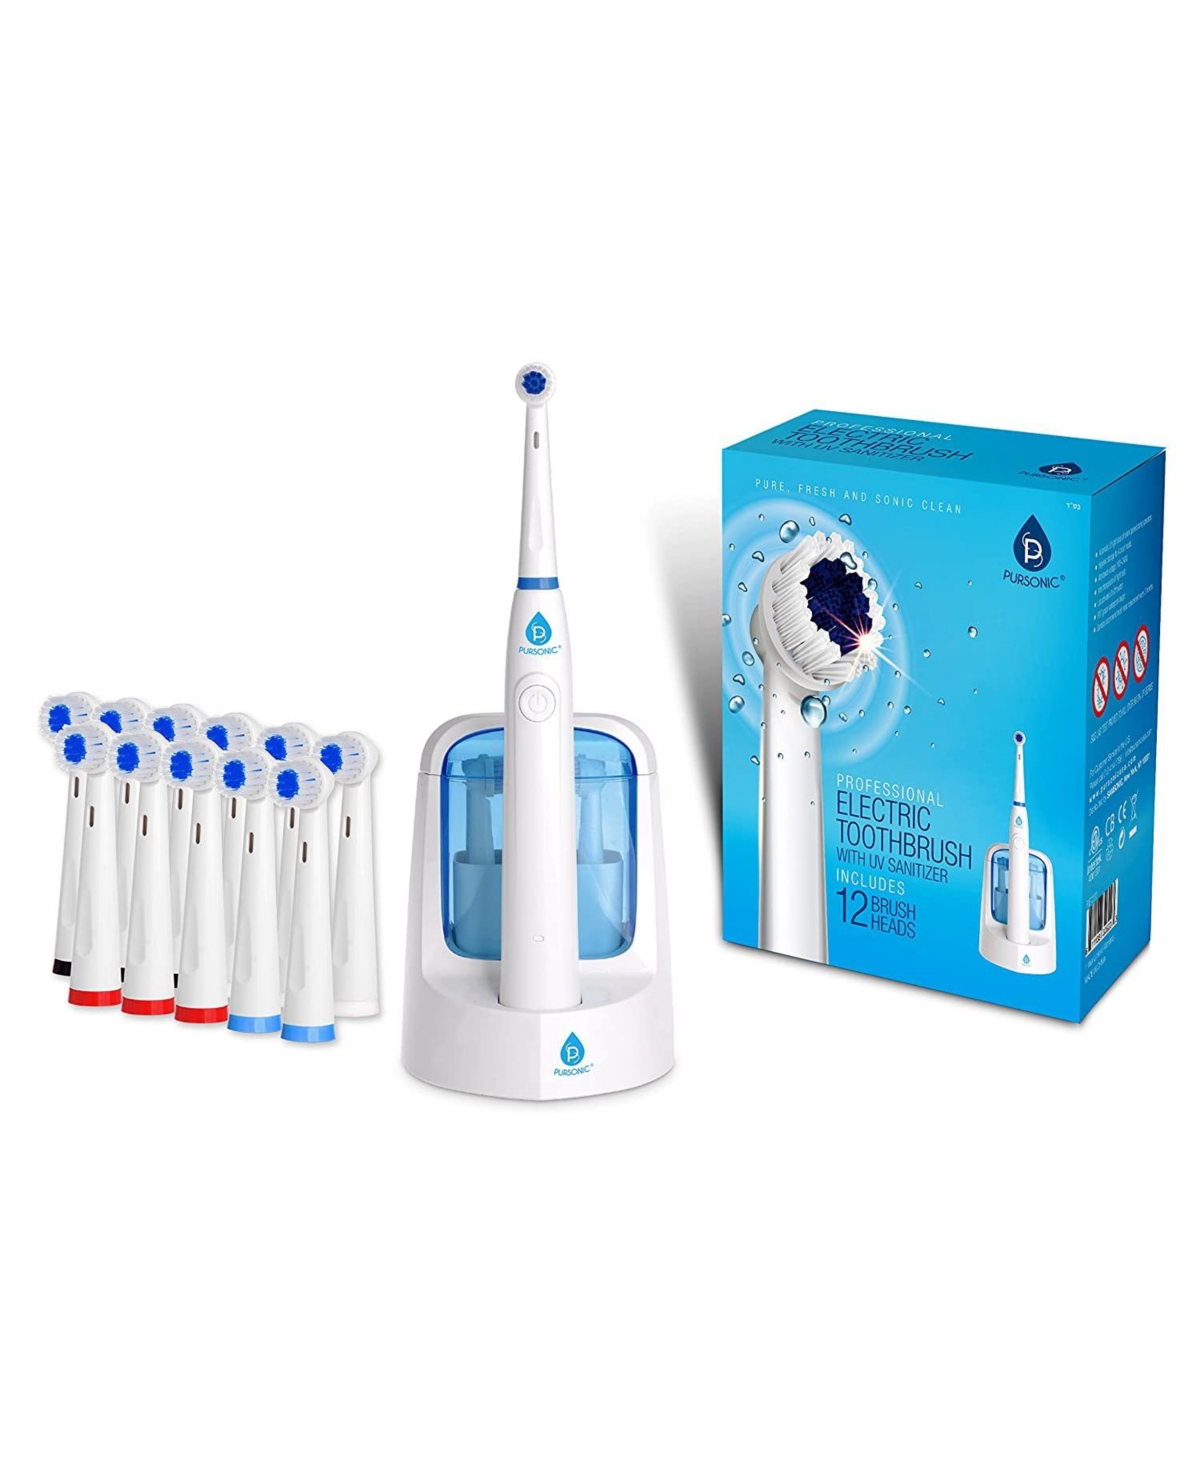 Pursonic Ret200 Power Rechargeable Electric Toothbrush With Uv Sanitizing Function, 12 Brush Heads Included In White